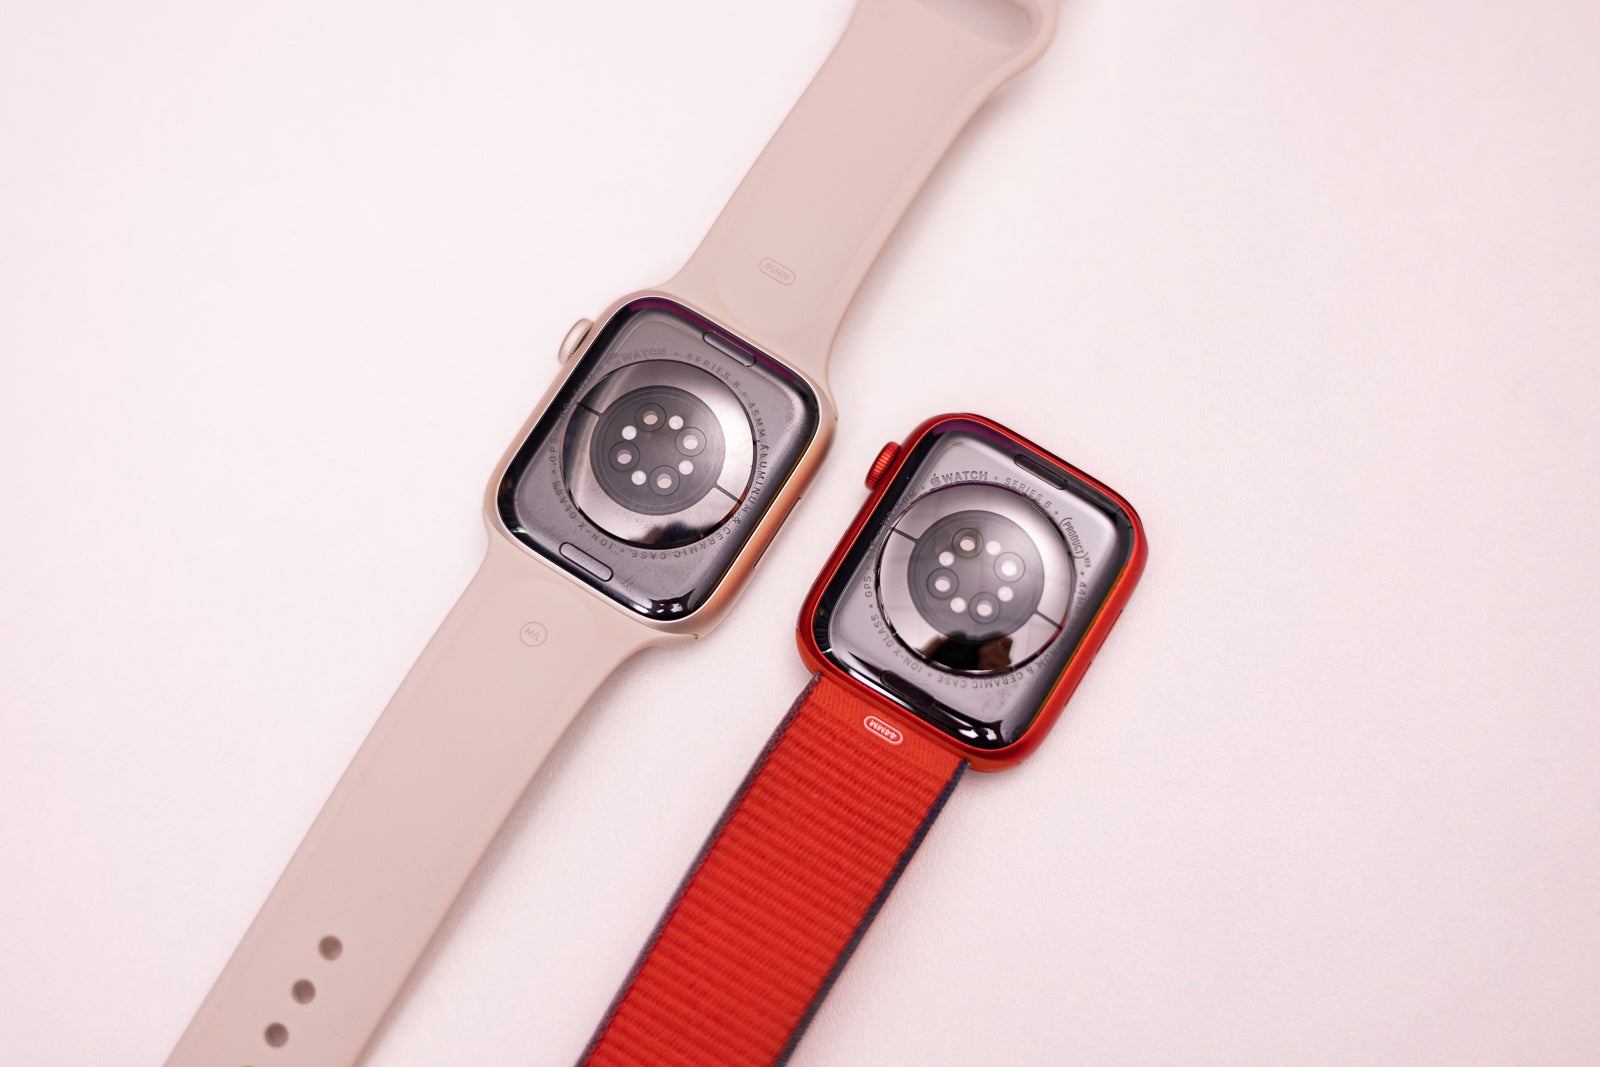 The sensors below (Image credit - PhoneArena) - Apple Watch Series 8 vs Watch Series 6: worth the upgrade? Or grab a deal?